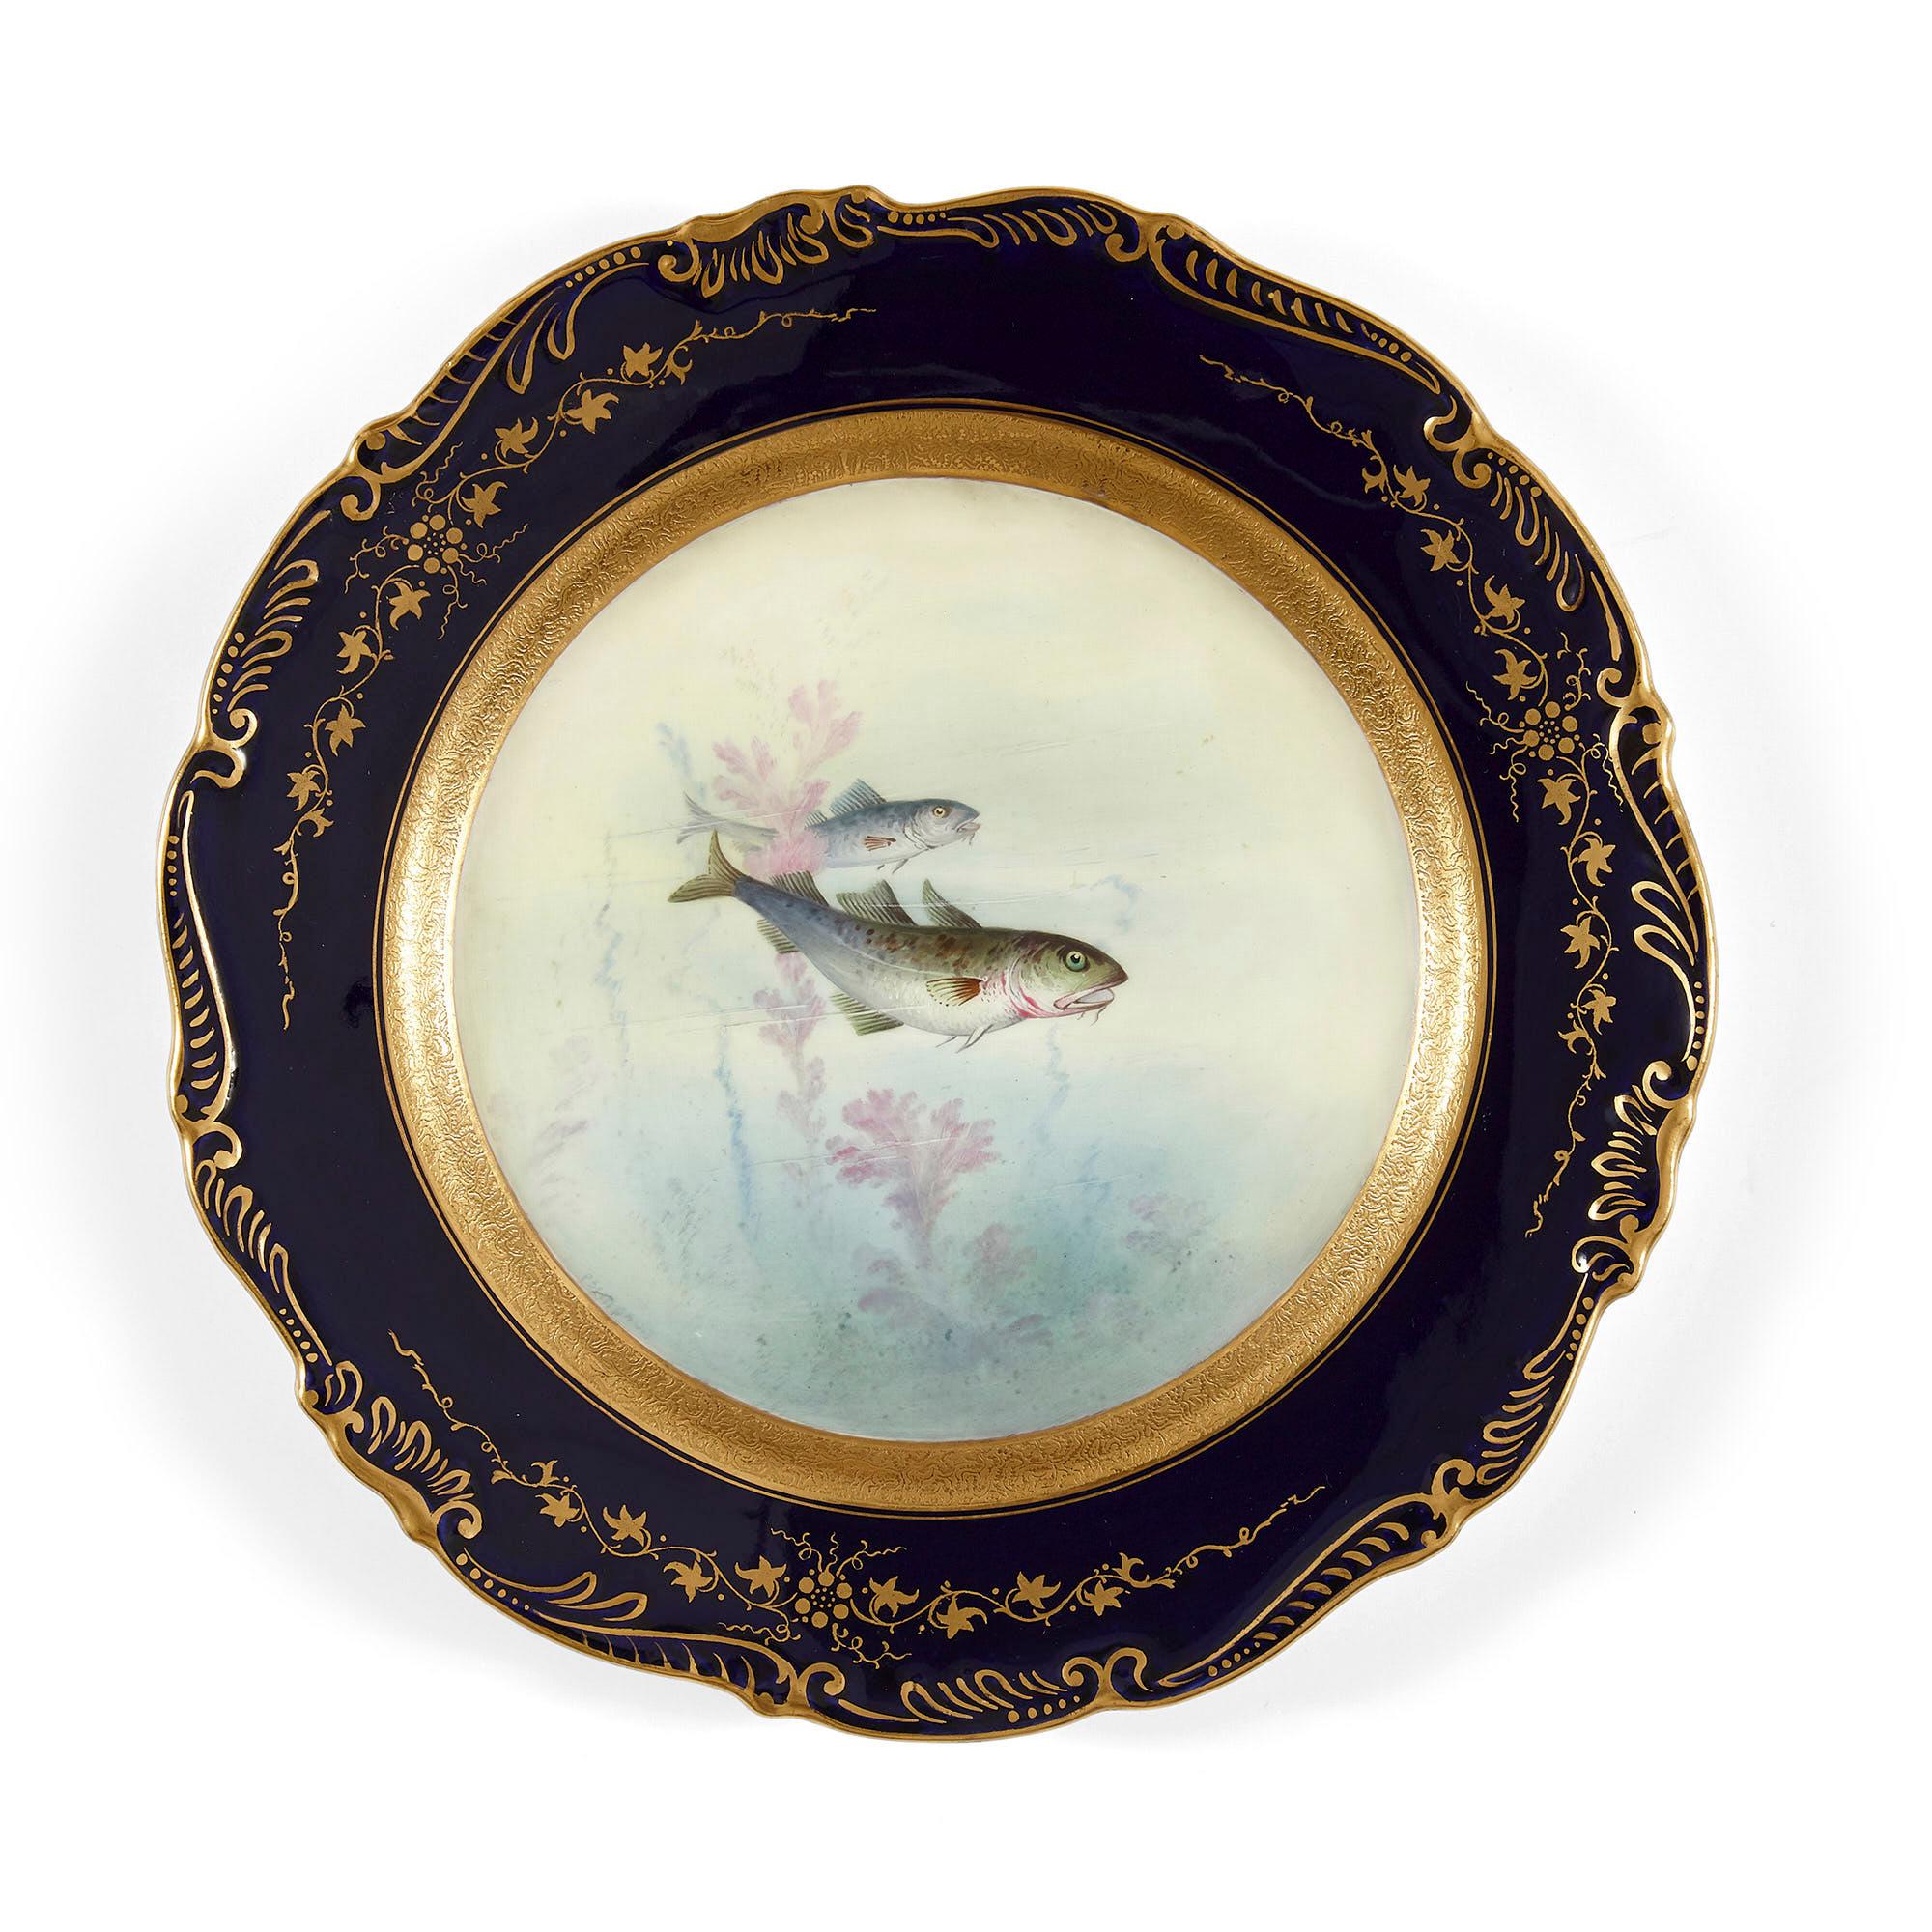 Set of antique coalport porcelain dinner plates depicting English fish.
English, late 19th century
Dimensions: Height 2cm, diameter 22cm

This charming set of nine dinner plates are of circular form, each decorated with a painted blue and gilt